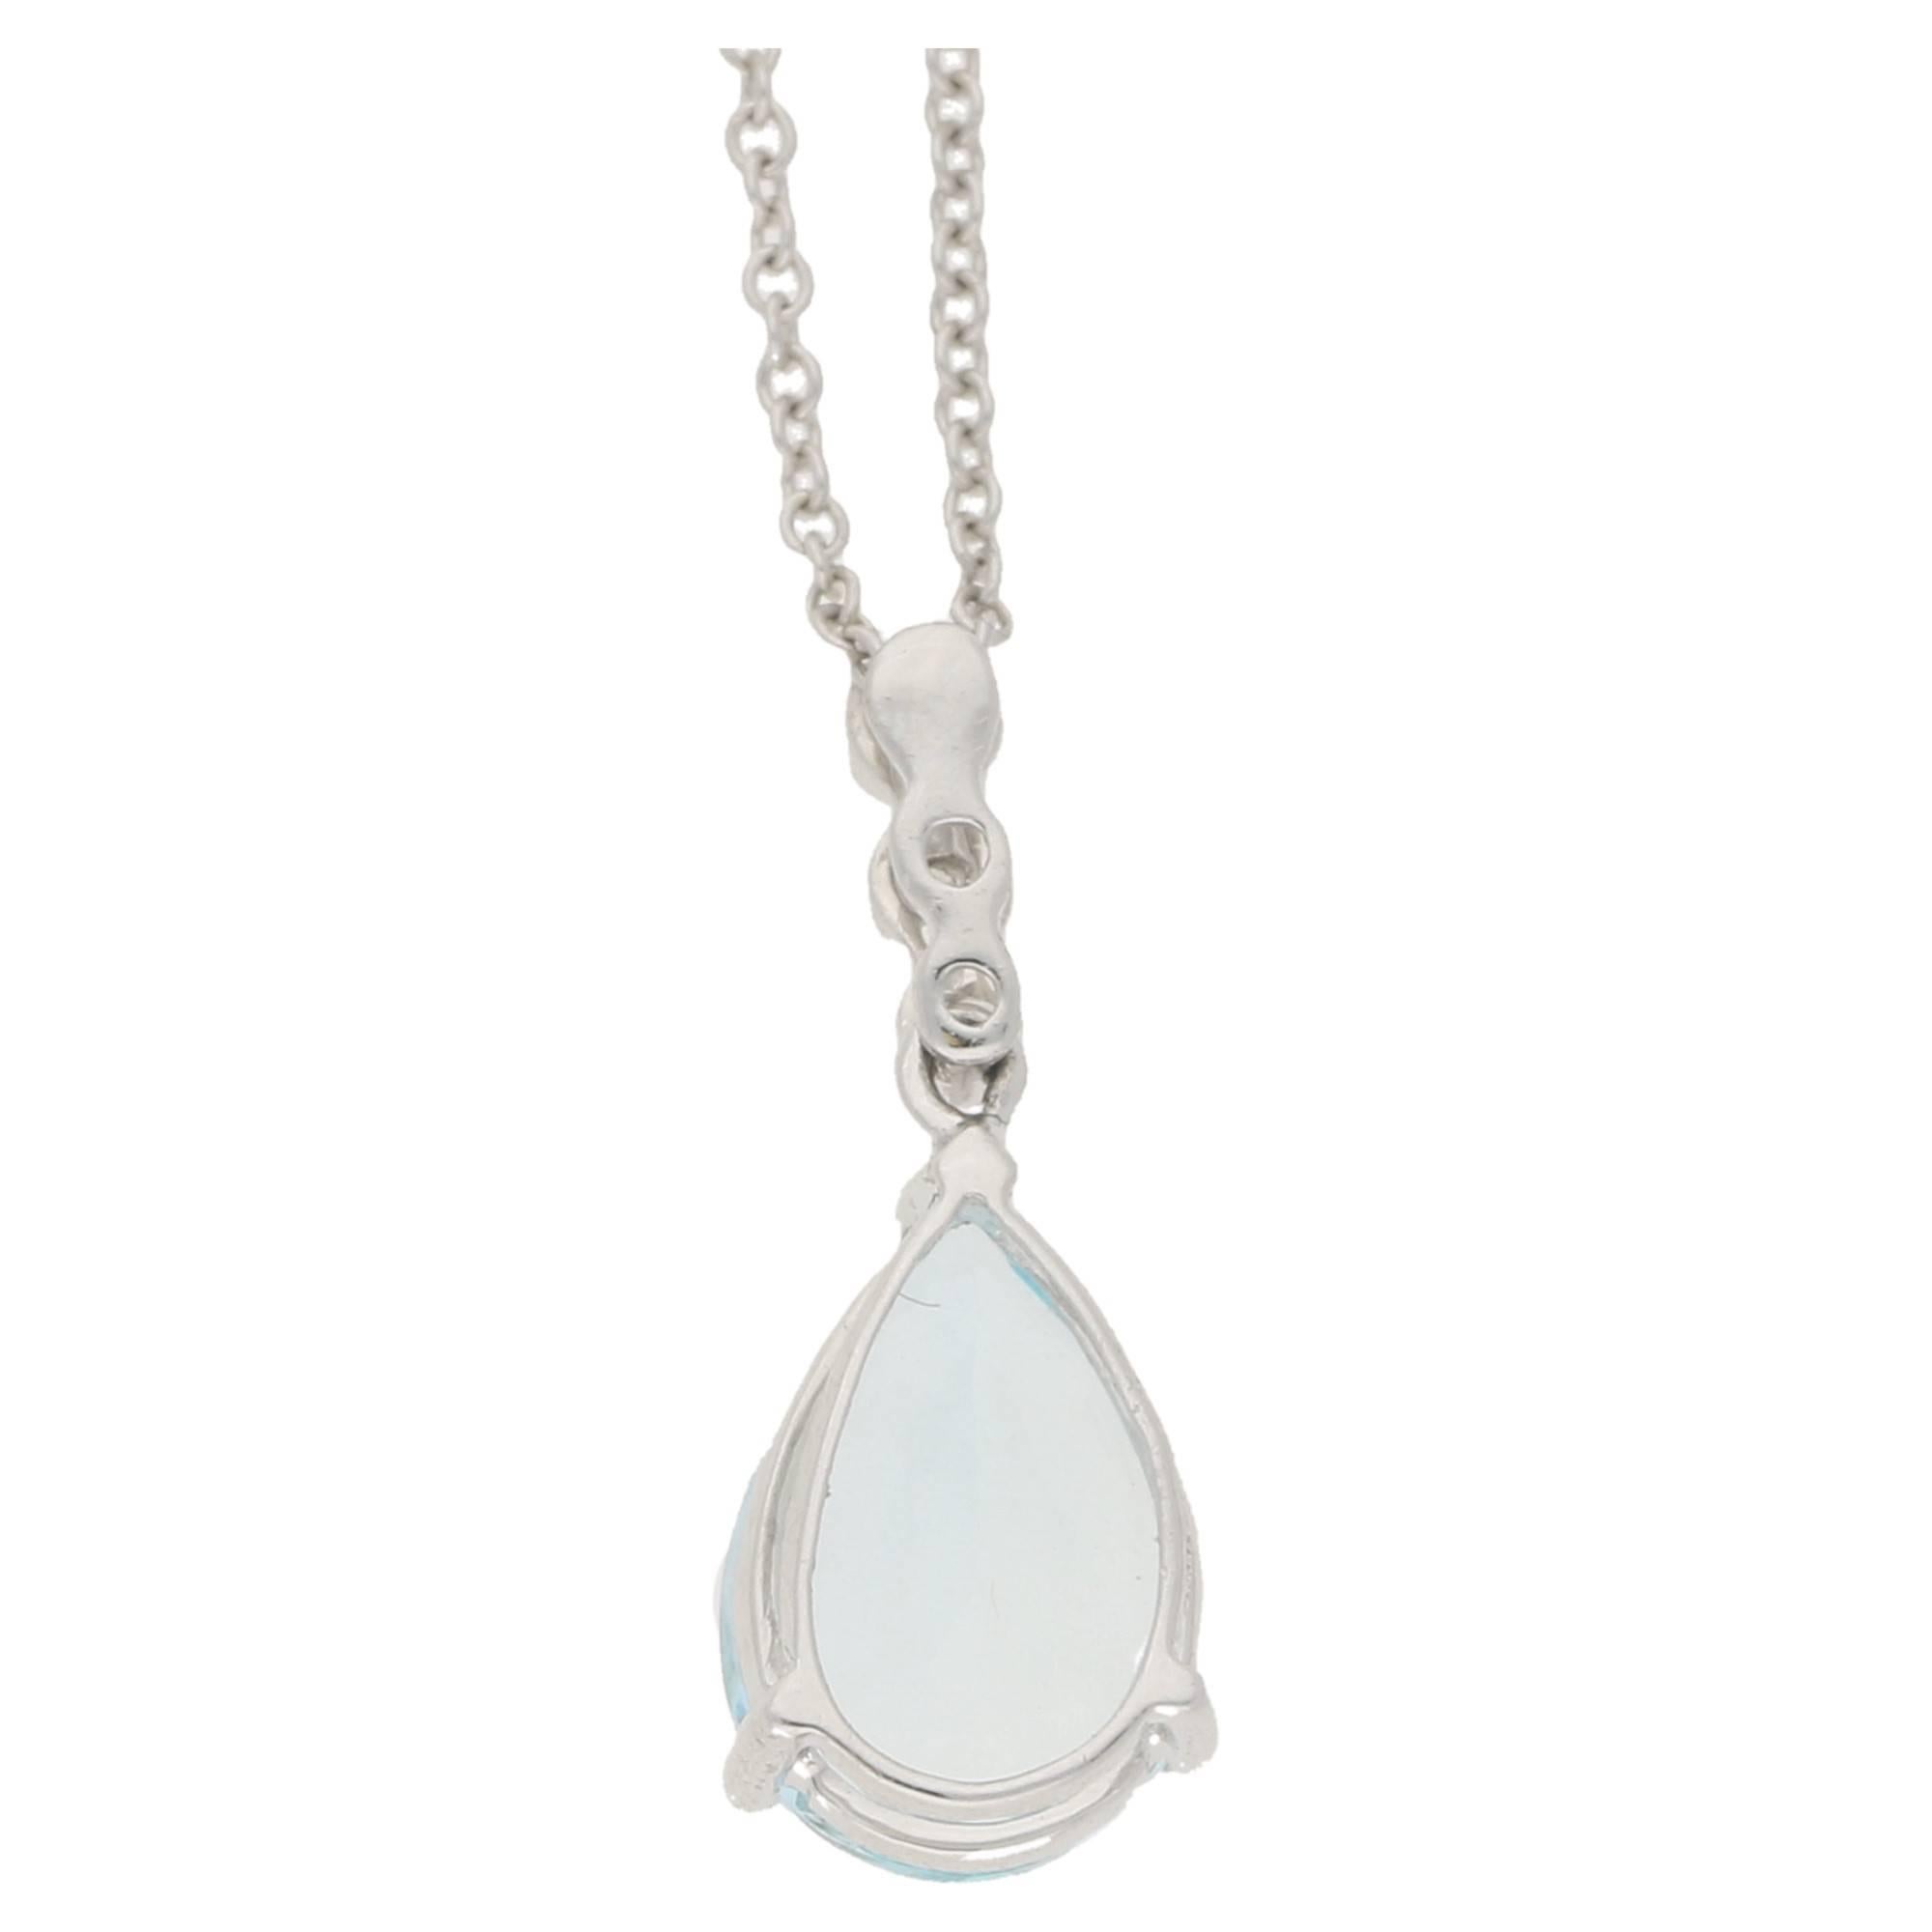 A very sweet 1.42ct pear shaped aquamarine pendant, with 0.05cts of diamond set above the pear drop. This piece is in 18k white gold, hallmarked 750. This pendant is on a 16